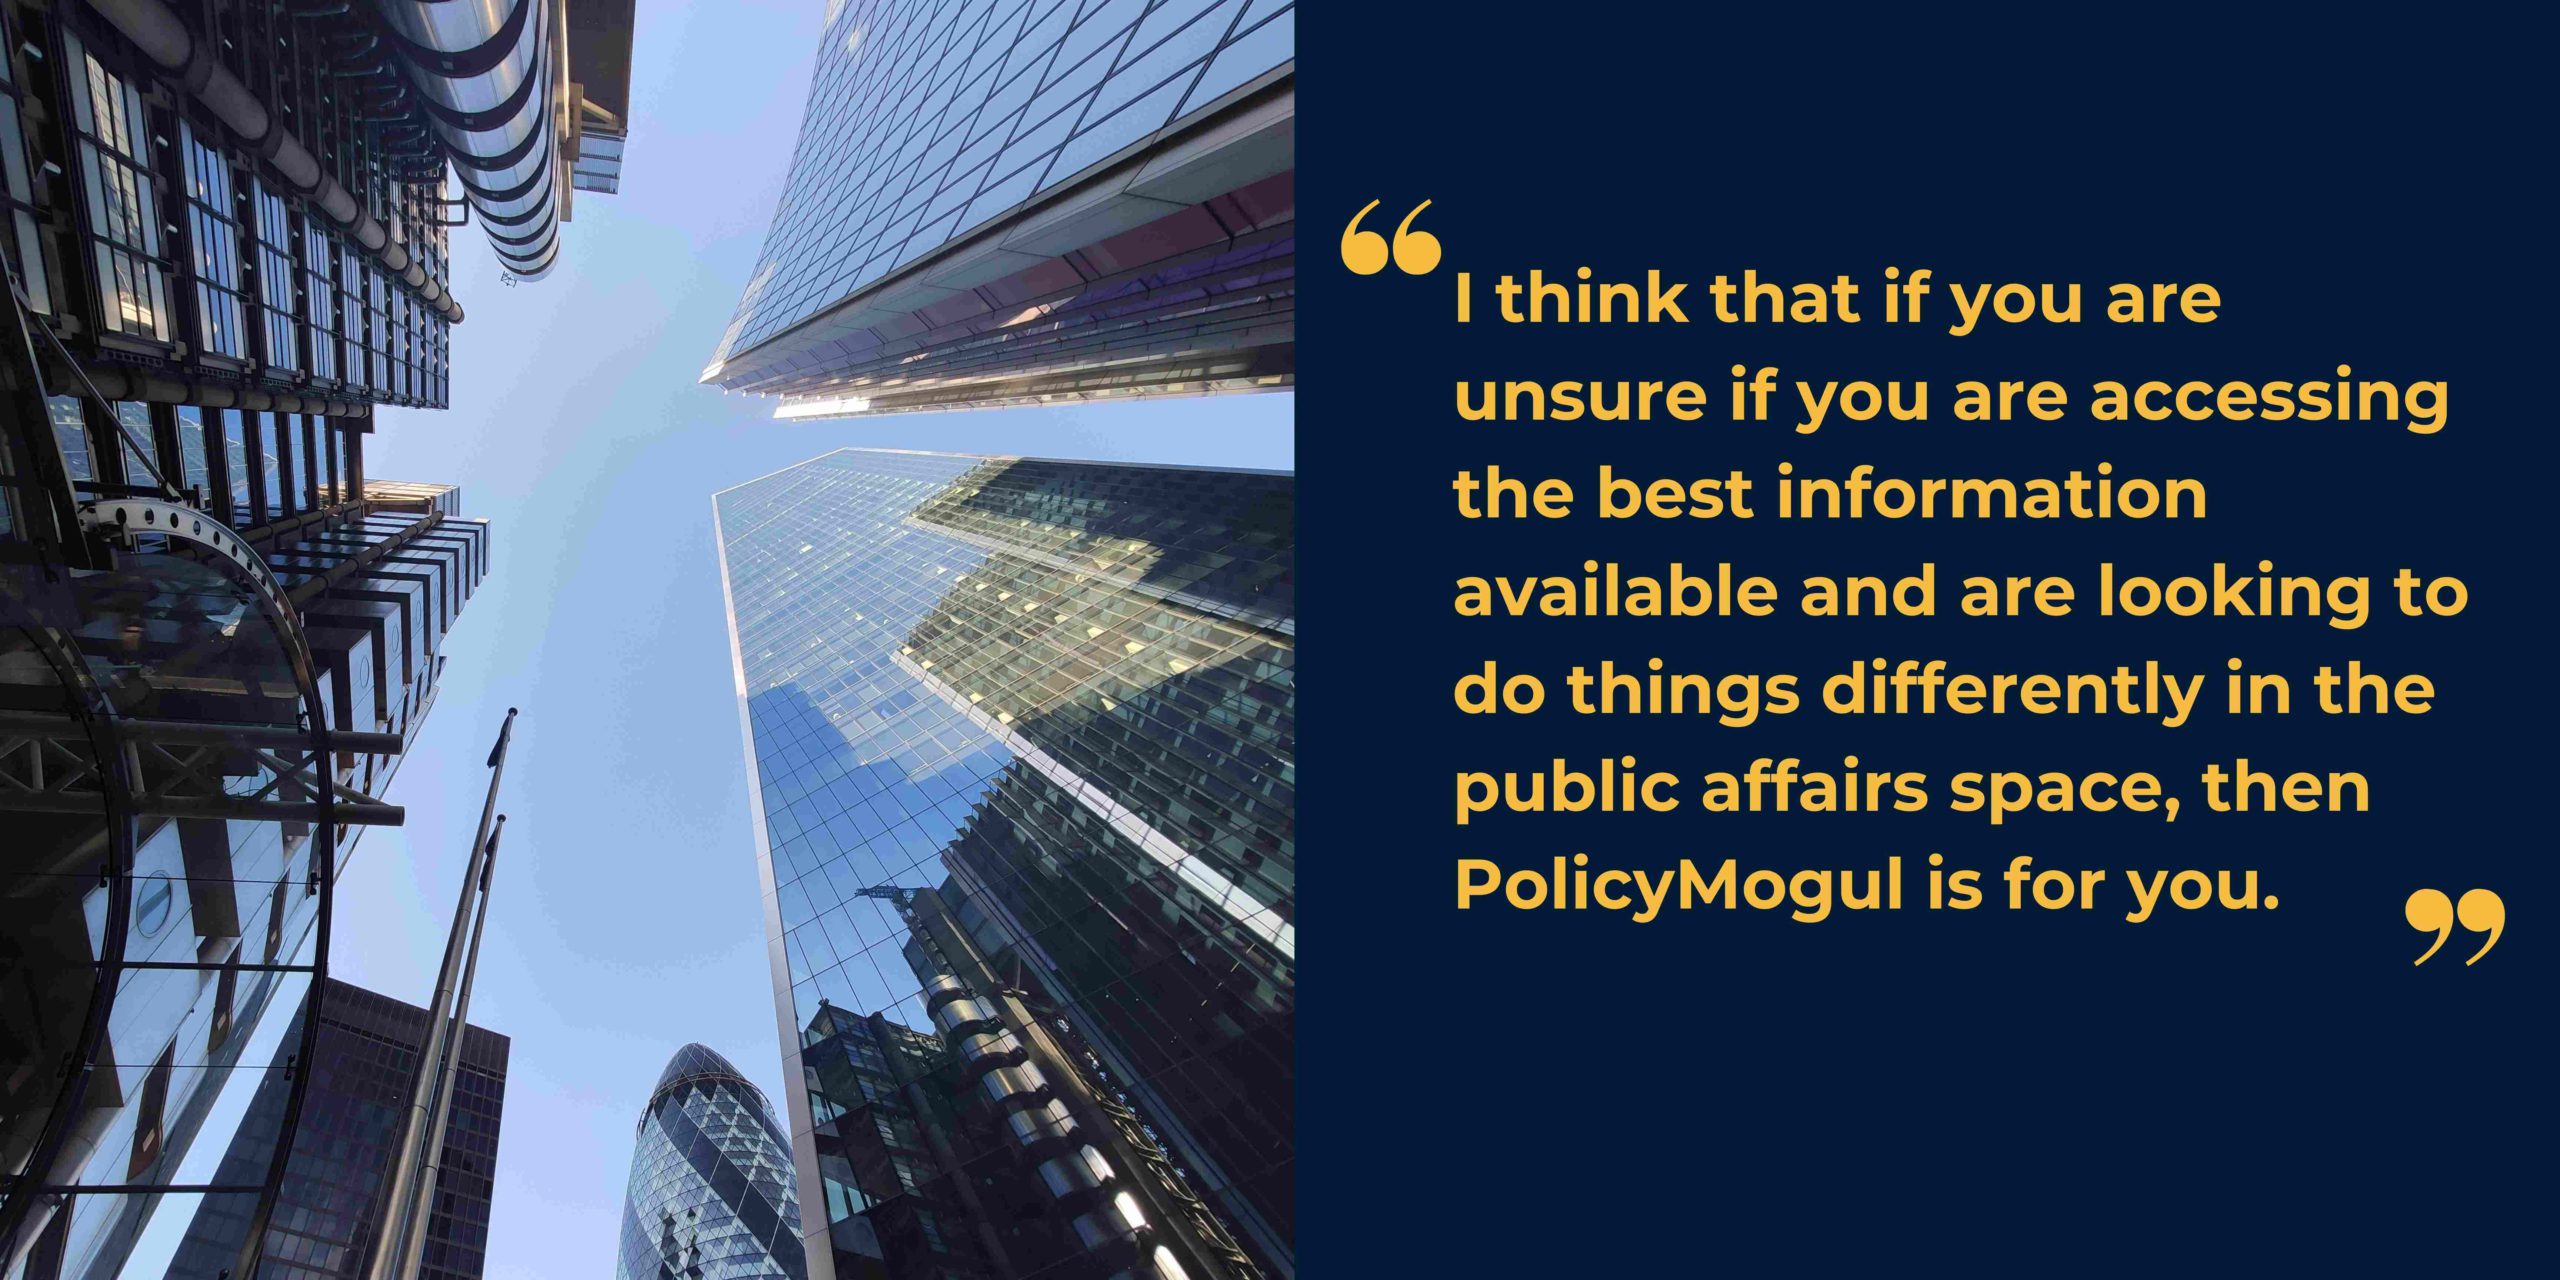 Image of tall buildings in the financial district of London alongside the quote "I think that if you are unsure if you are accessing the best information available and are looking to do things differently in the public affairs space, then PolicyMogul is for you."